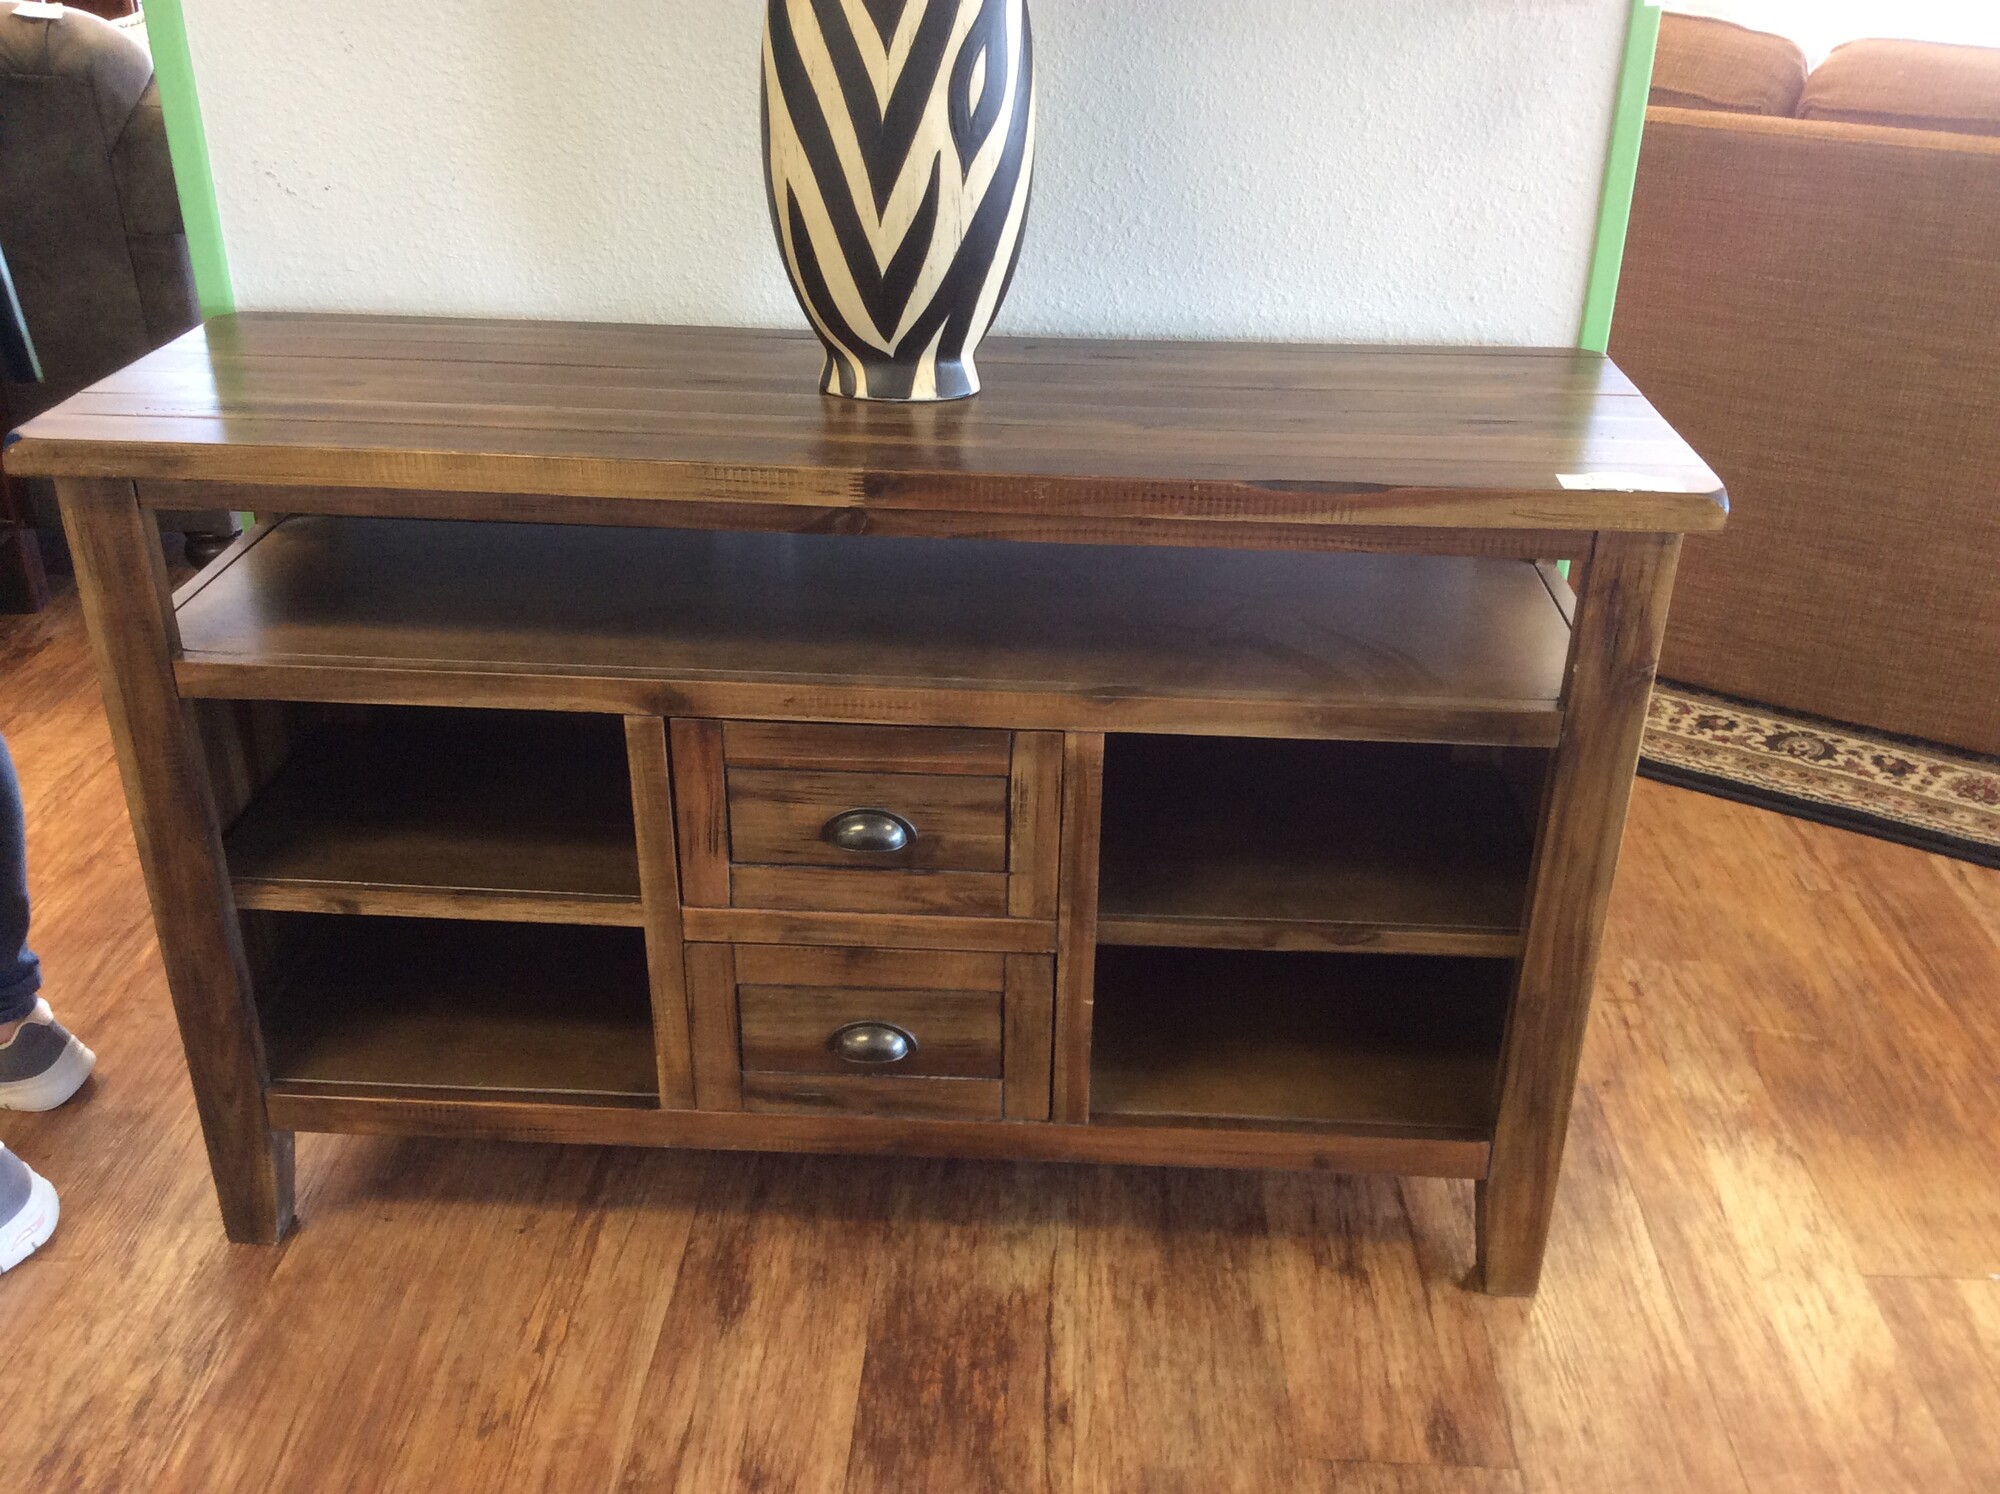 This Rusitc Wood Media Center has a awesome butcher block wood style top for the perfect farm house look. This media center features 2 small drawers and 4 cubbie hole shelfs for extra decor.